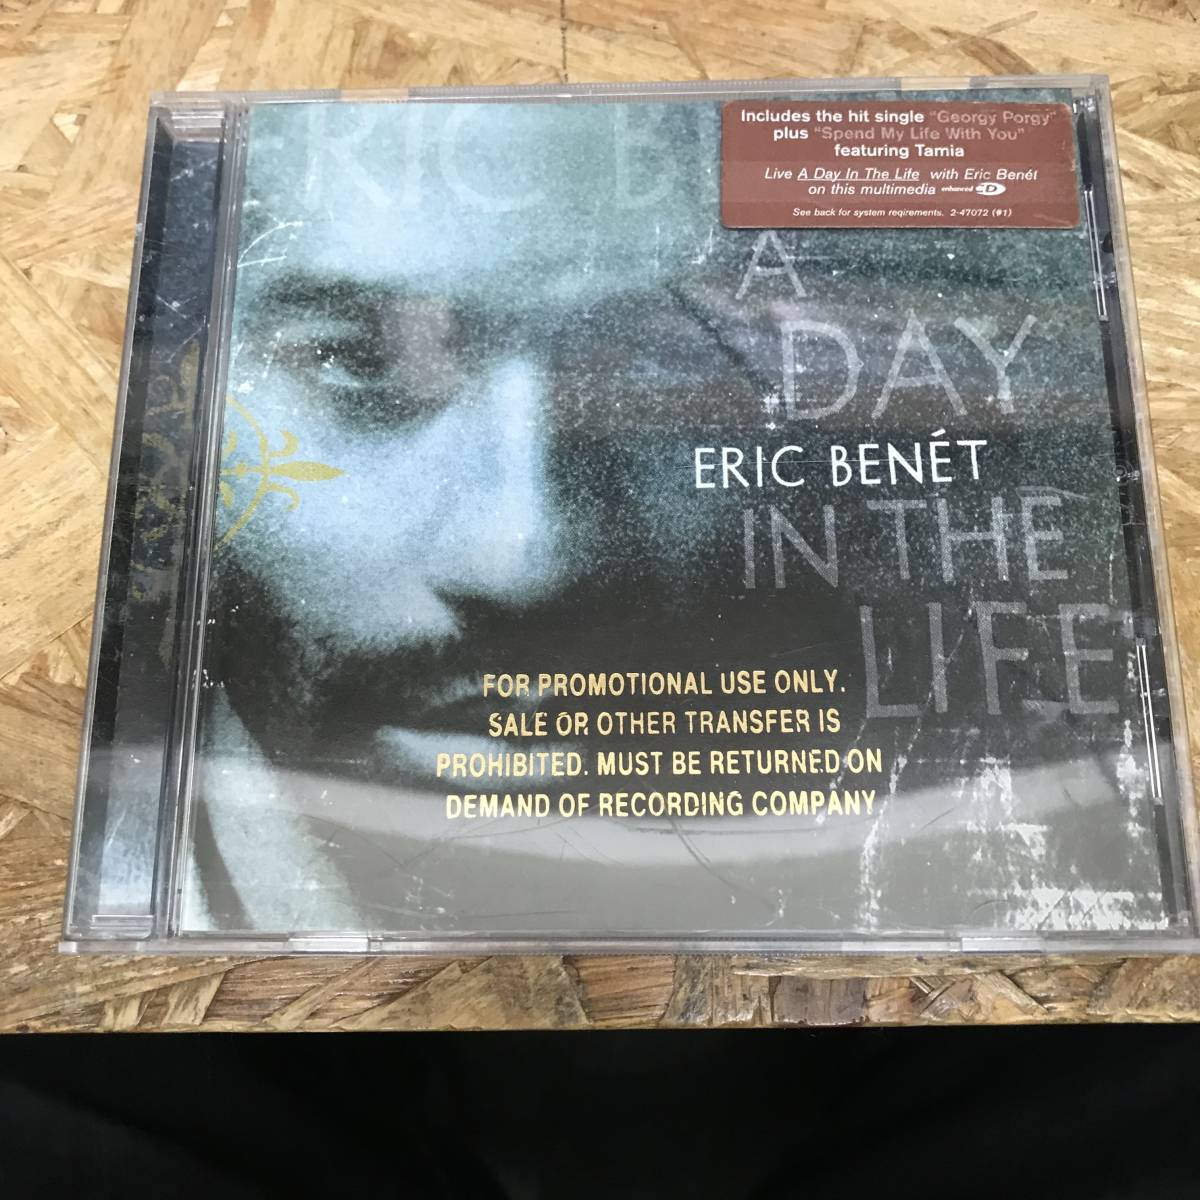 ● HIPHOP,R&B ERIC BENET - A DAY IN THE LIFE アルバム,名盤,PROMO盤 CD 中古品_画像1